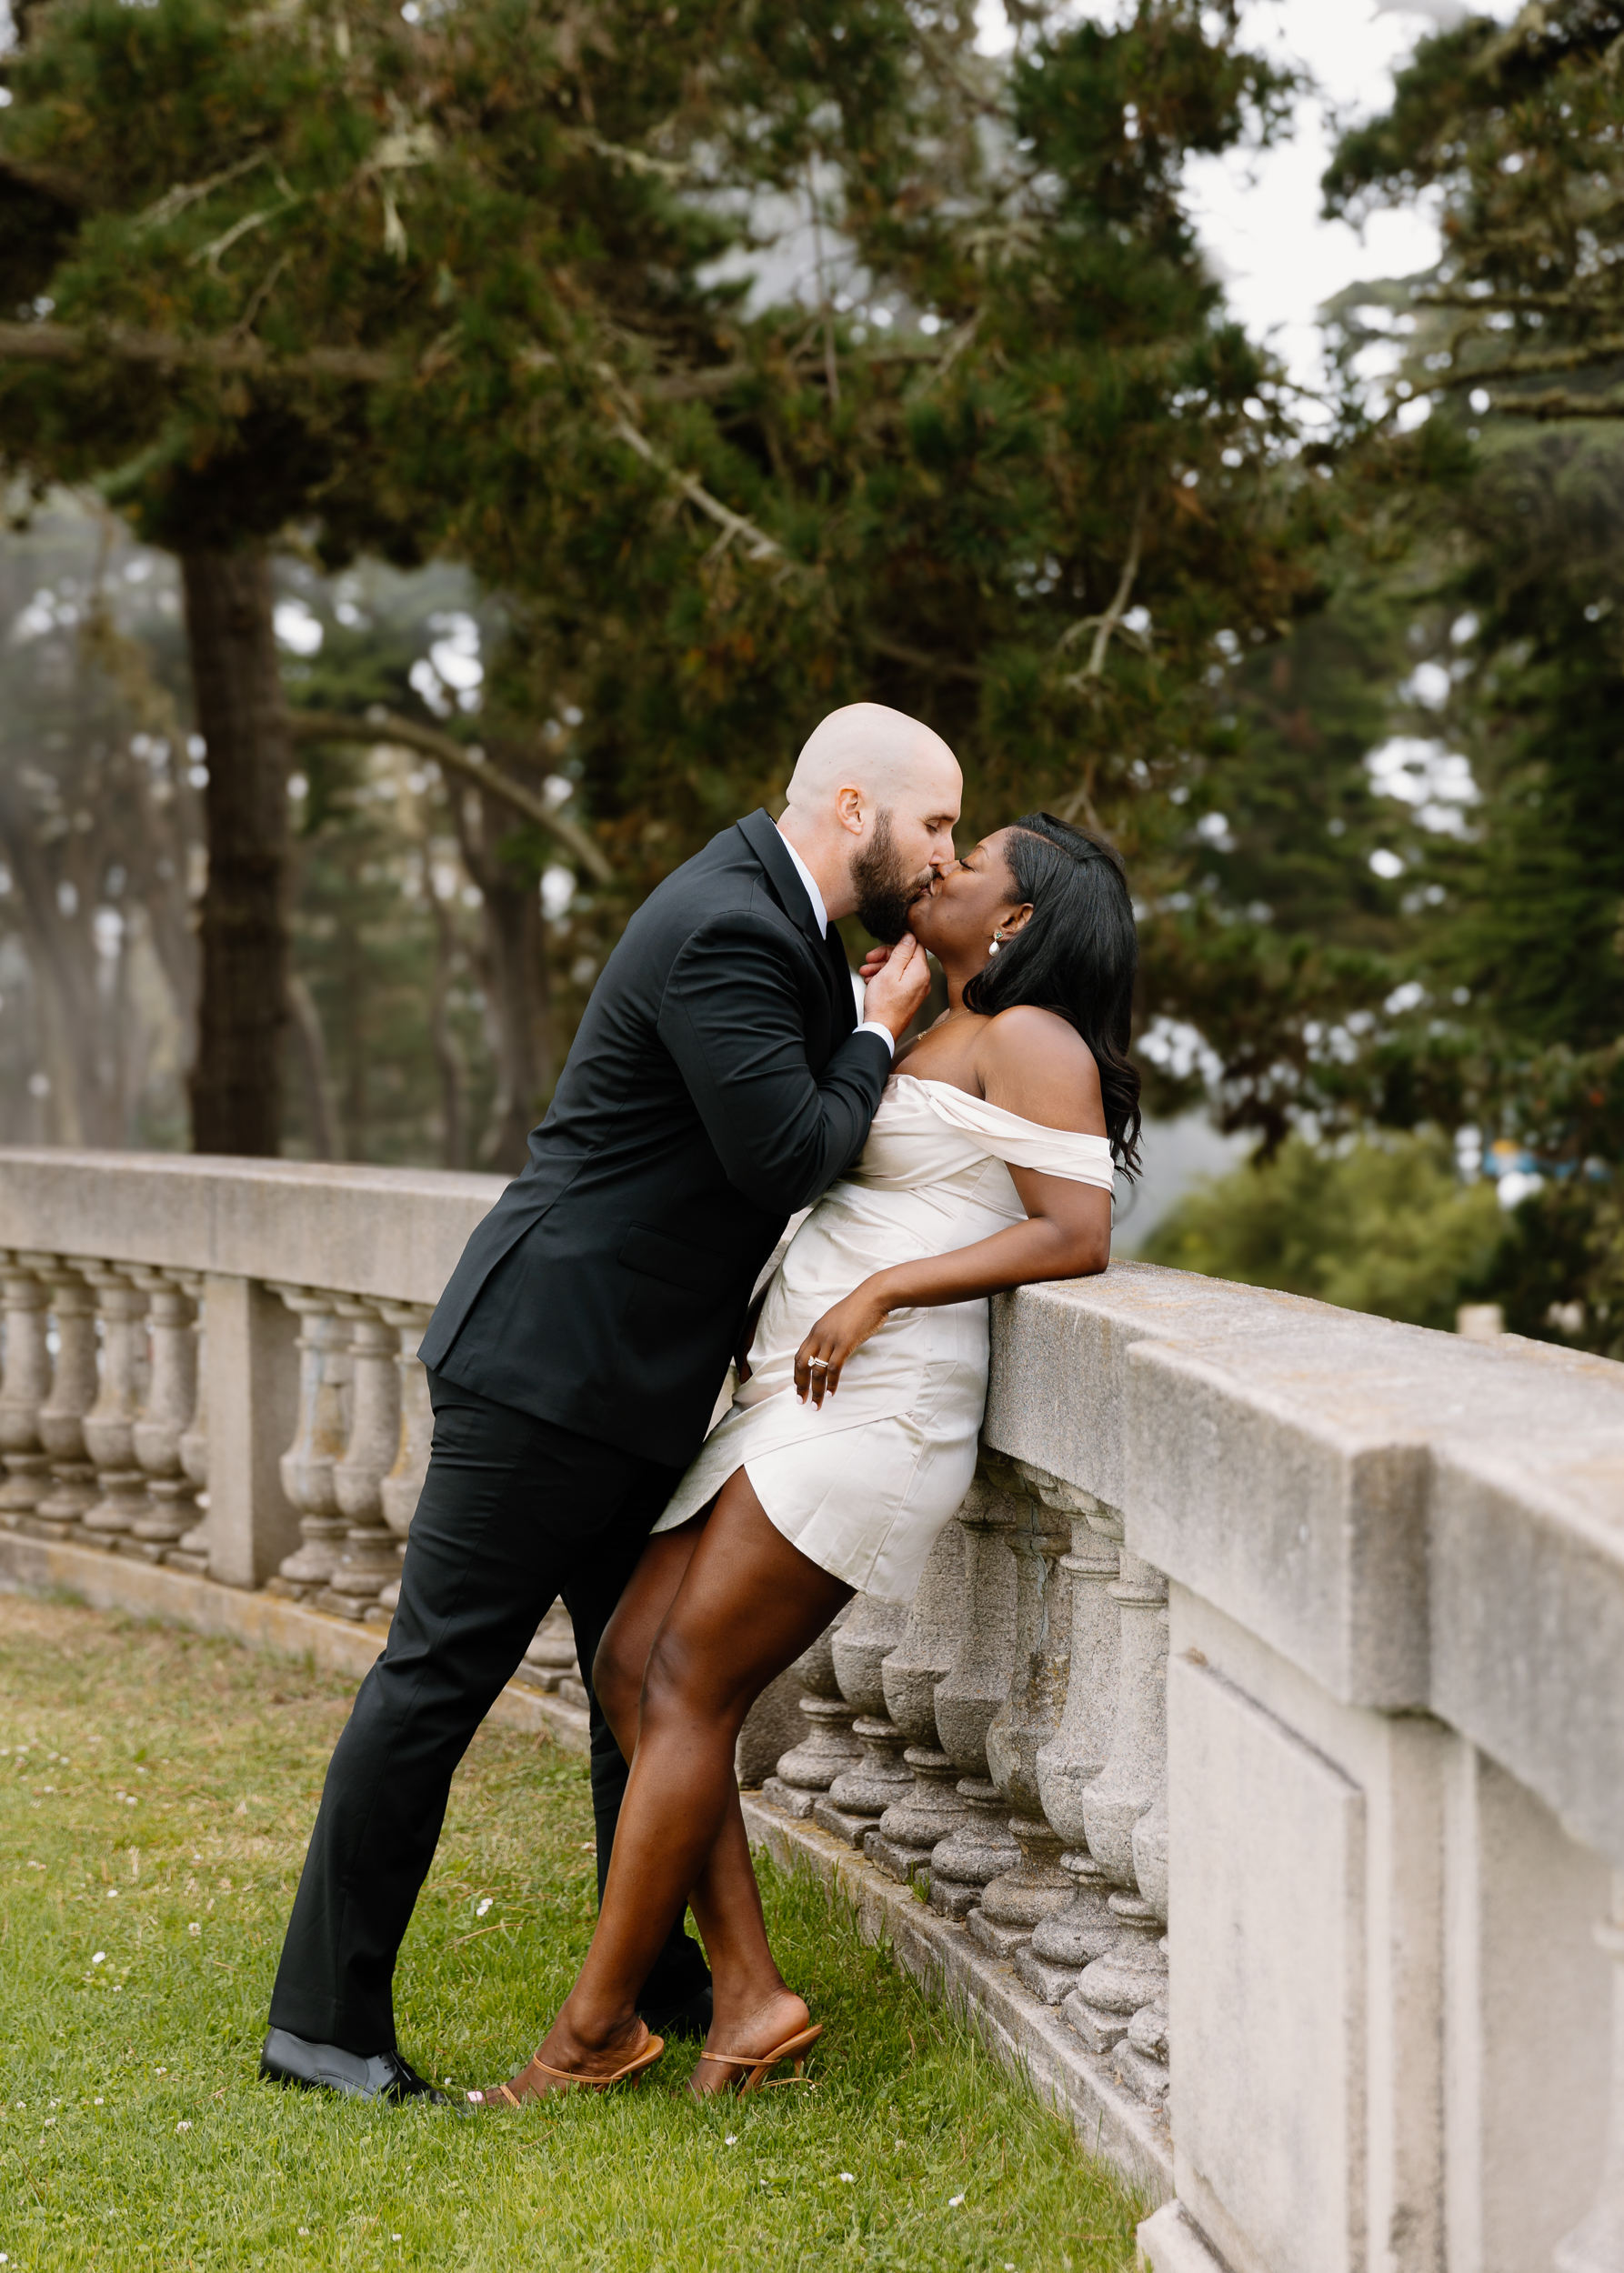 The couple shares a kiss, enveloped by the Legion of Honor's foggy allure, creating a romantic and timeless image.